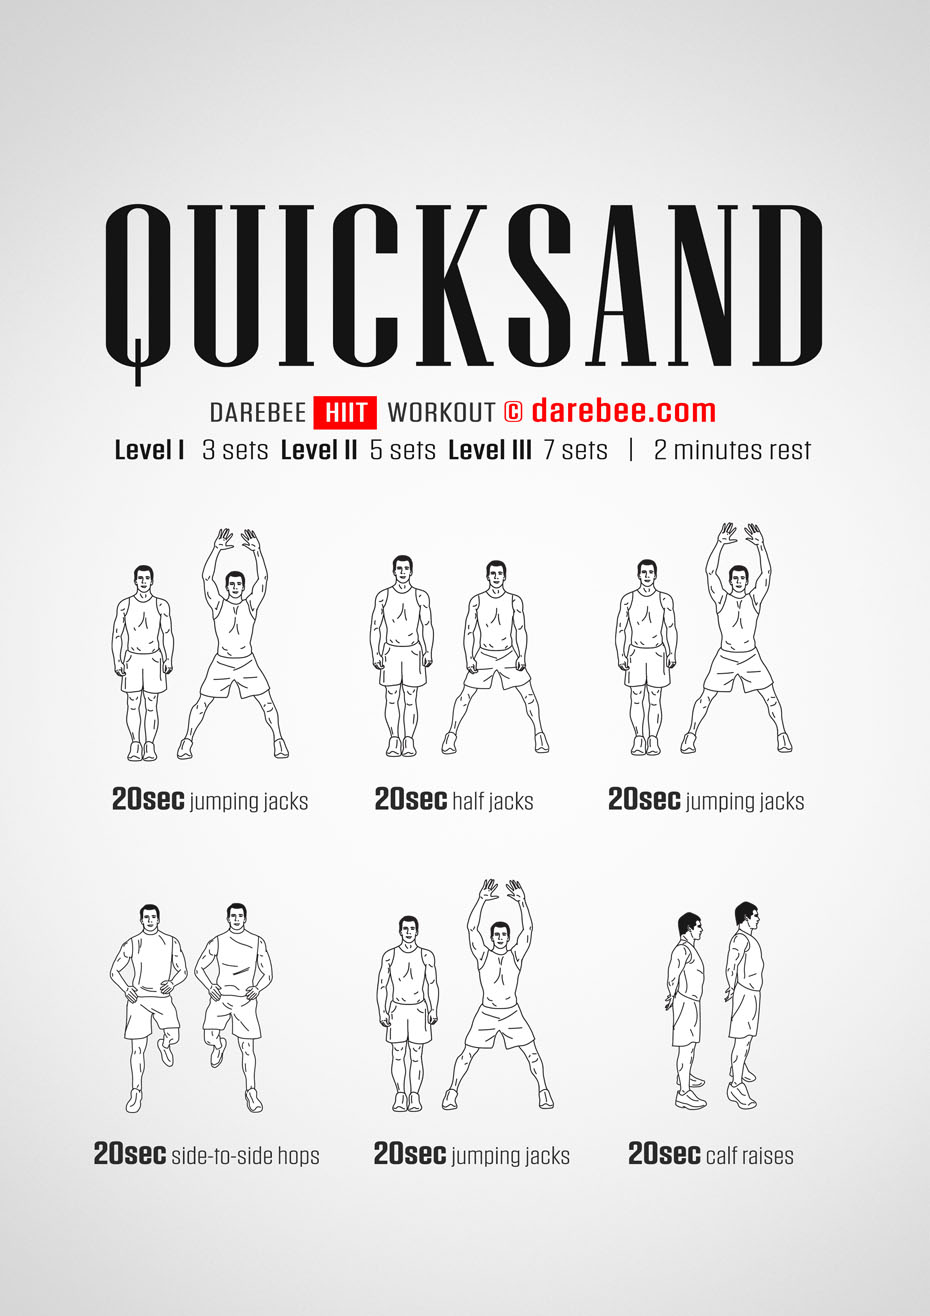 Quicksand is a Darebee home-fitness HIIT workout that will make you feel stronger and be healthier faster. 